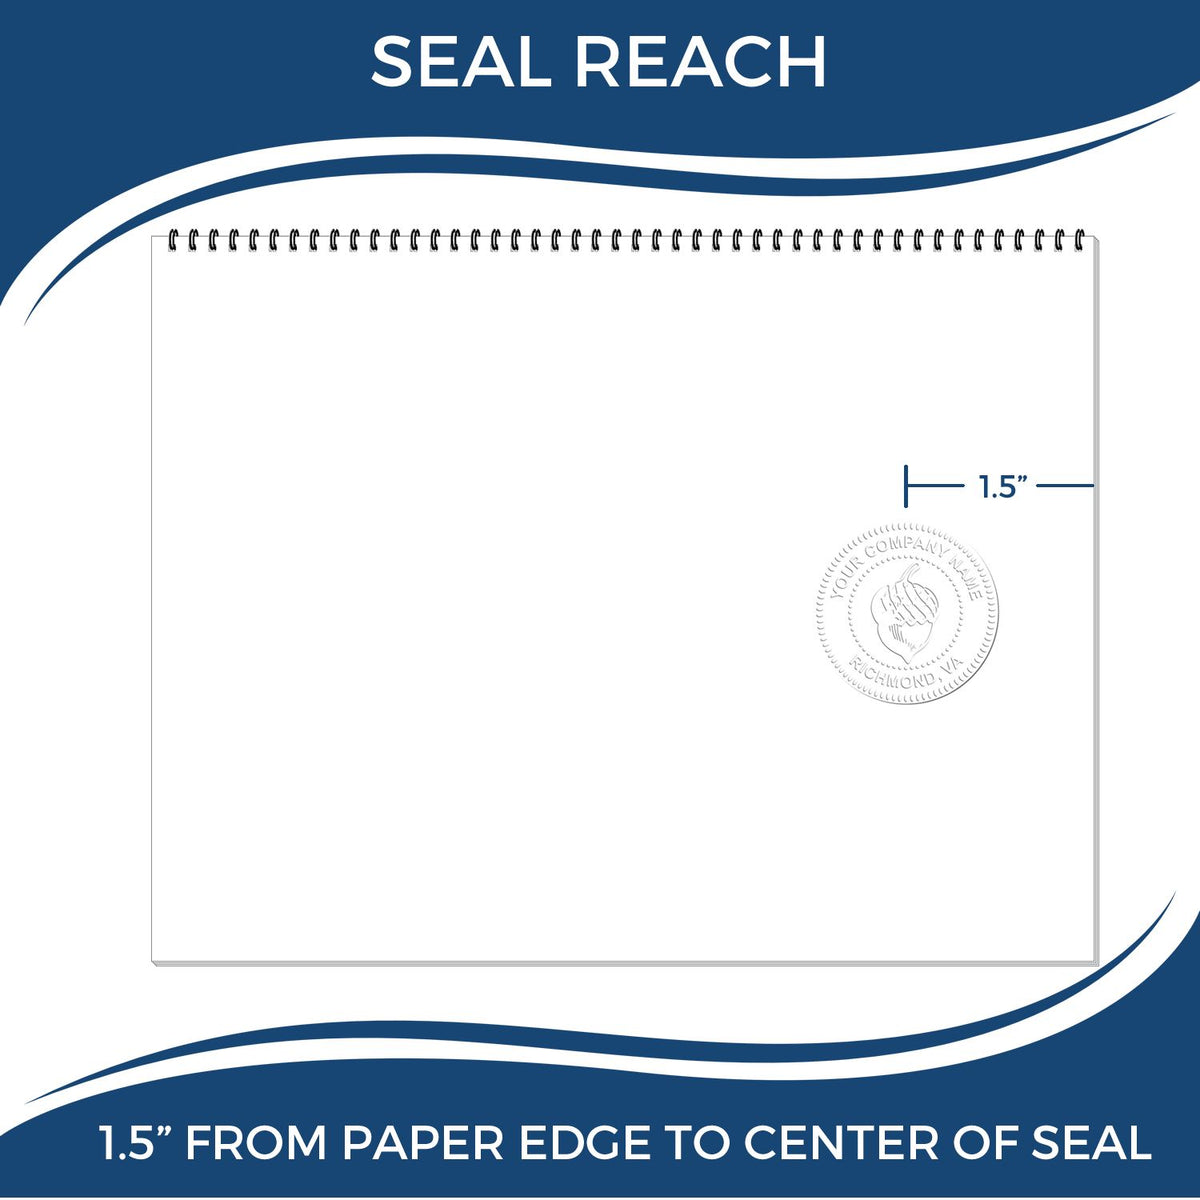 An infographic showing the seal reach which is represented by a ruler and a miniature seal image of the Gift Washington Engineer Seal